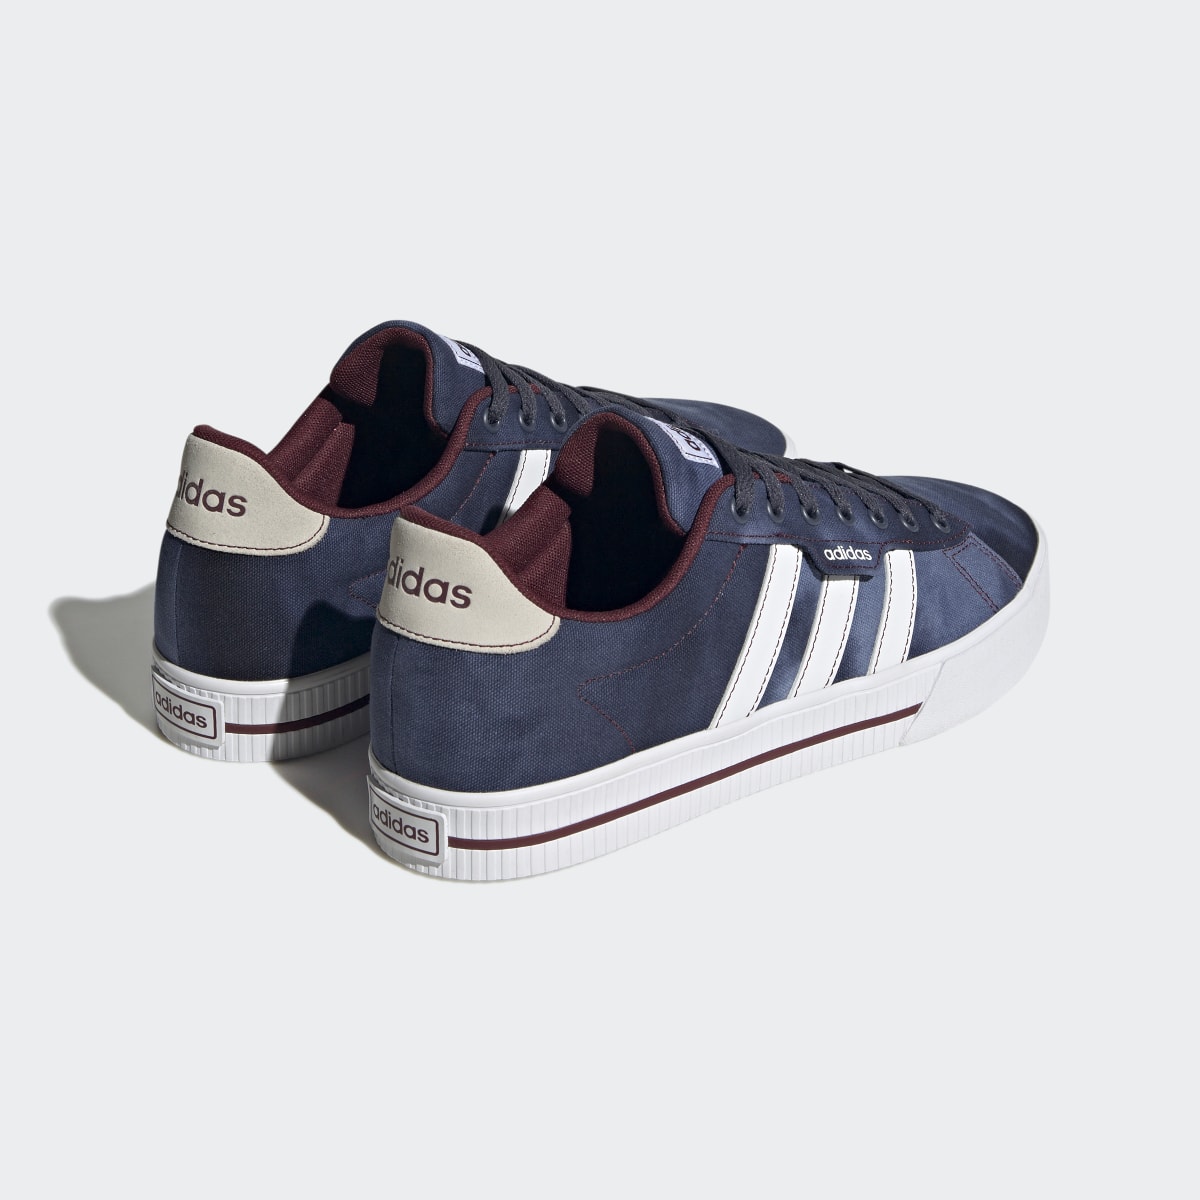 Adidas Daily 3.0 Lifestyle Skateboarding Suede Shoes. 6